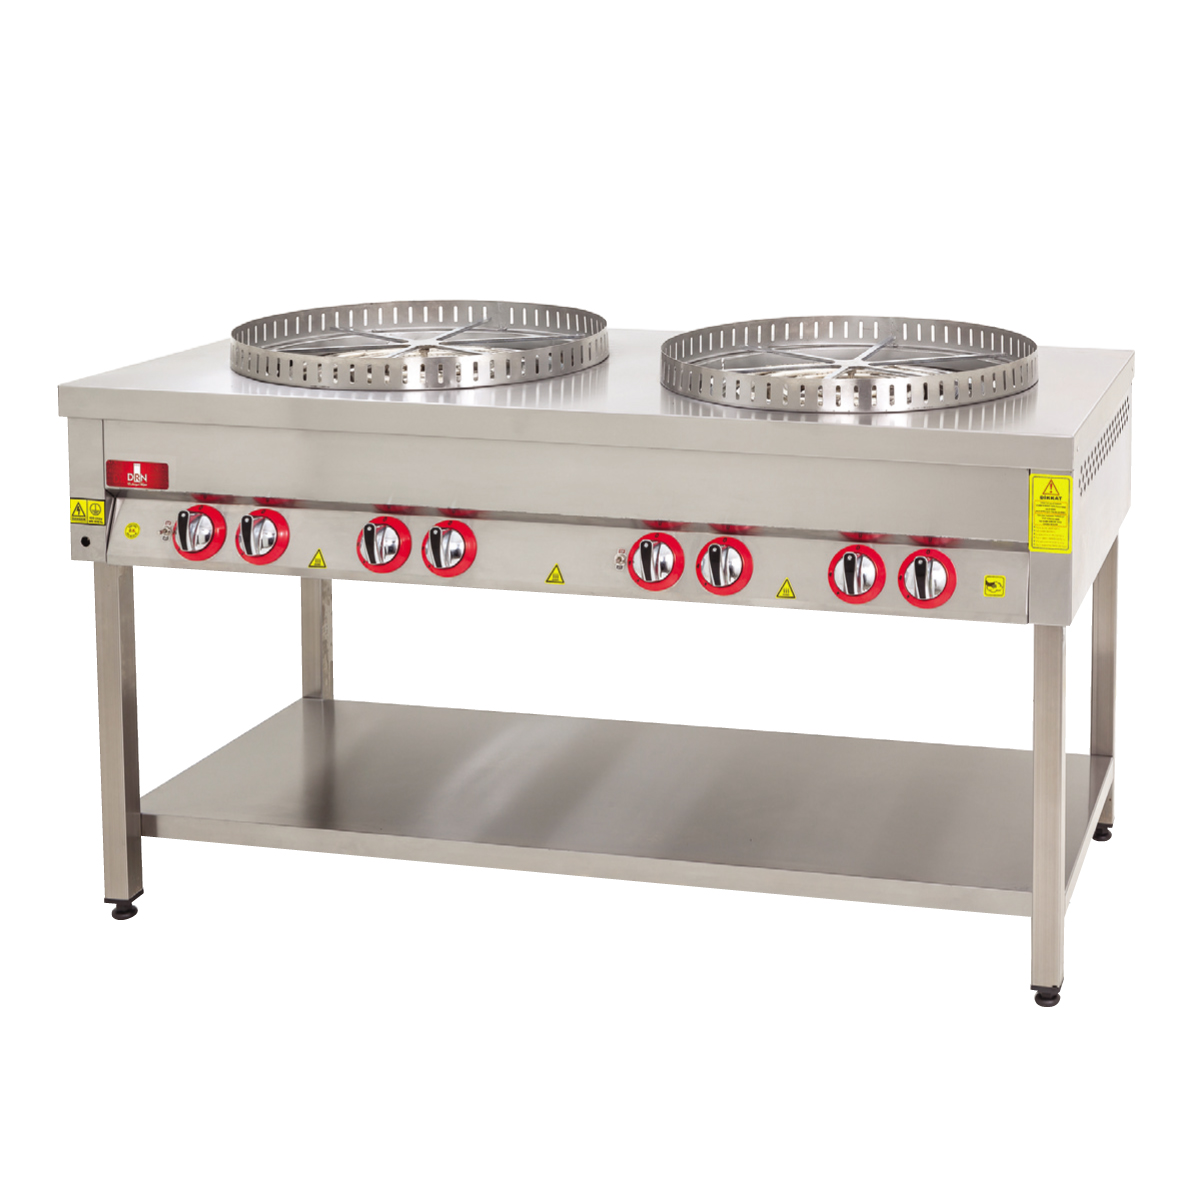 Patty Cookers With Bottom Shelf - 2 Burner - Gas